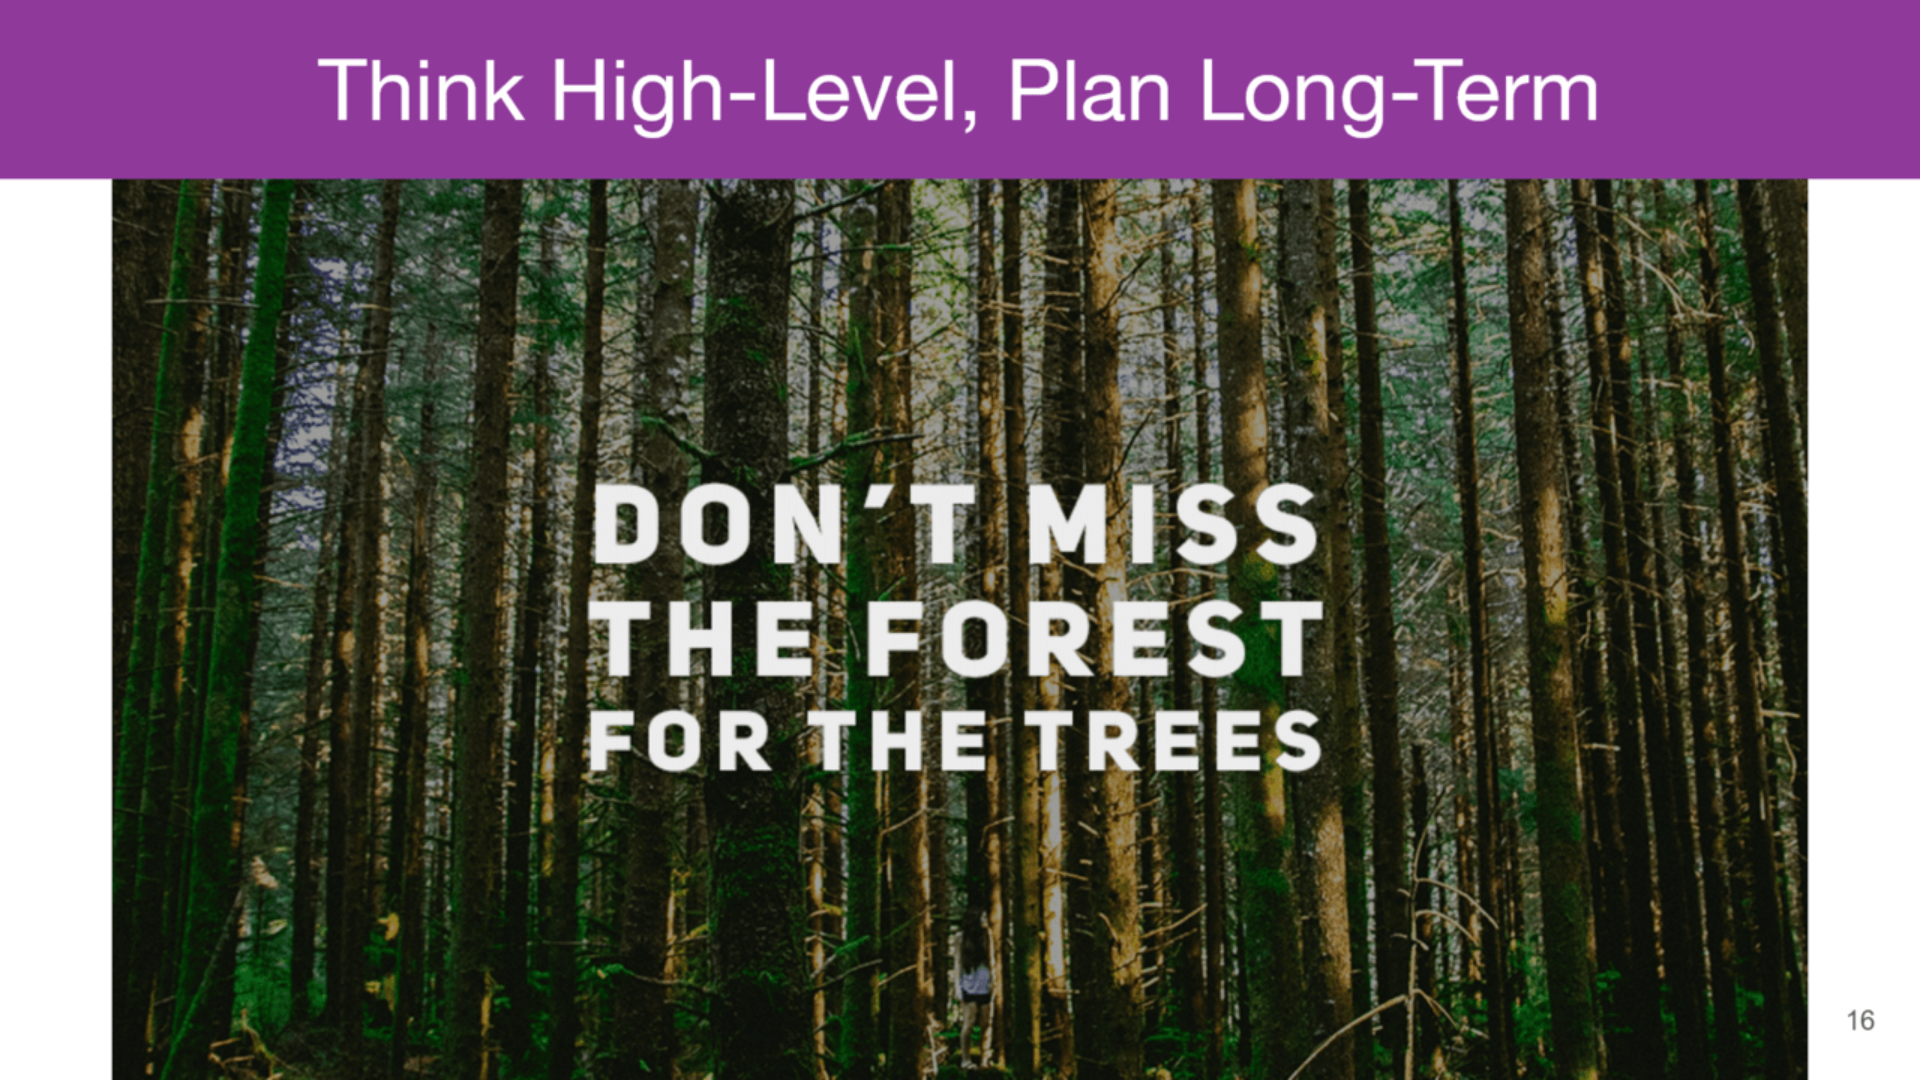 How To Be An Effective Tech Lead [Part 5] - Think High-Level, Plan Long-Term